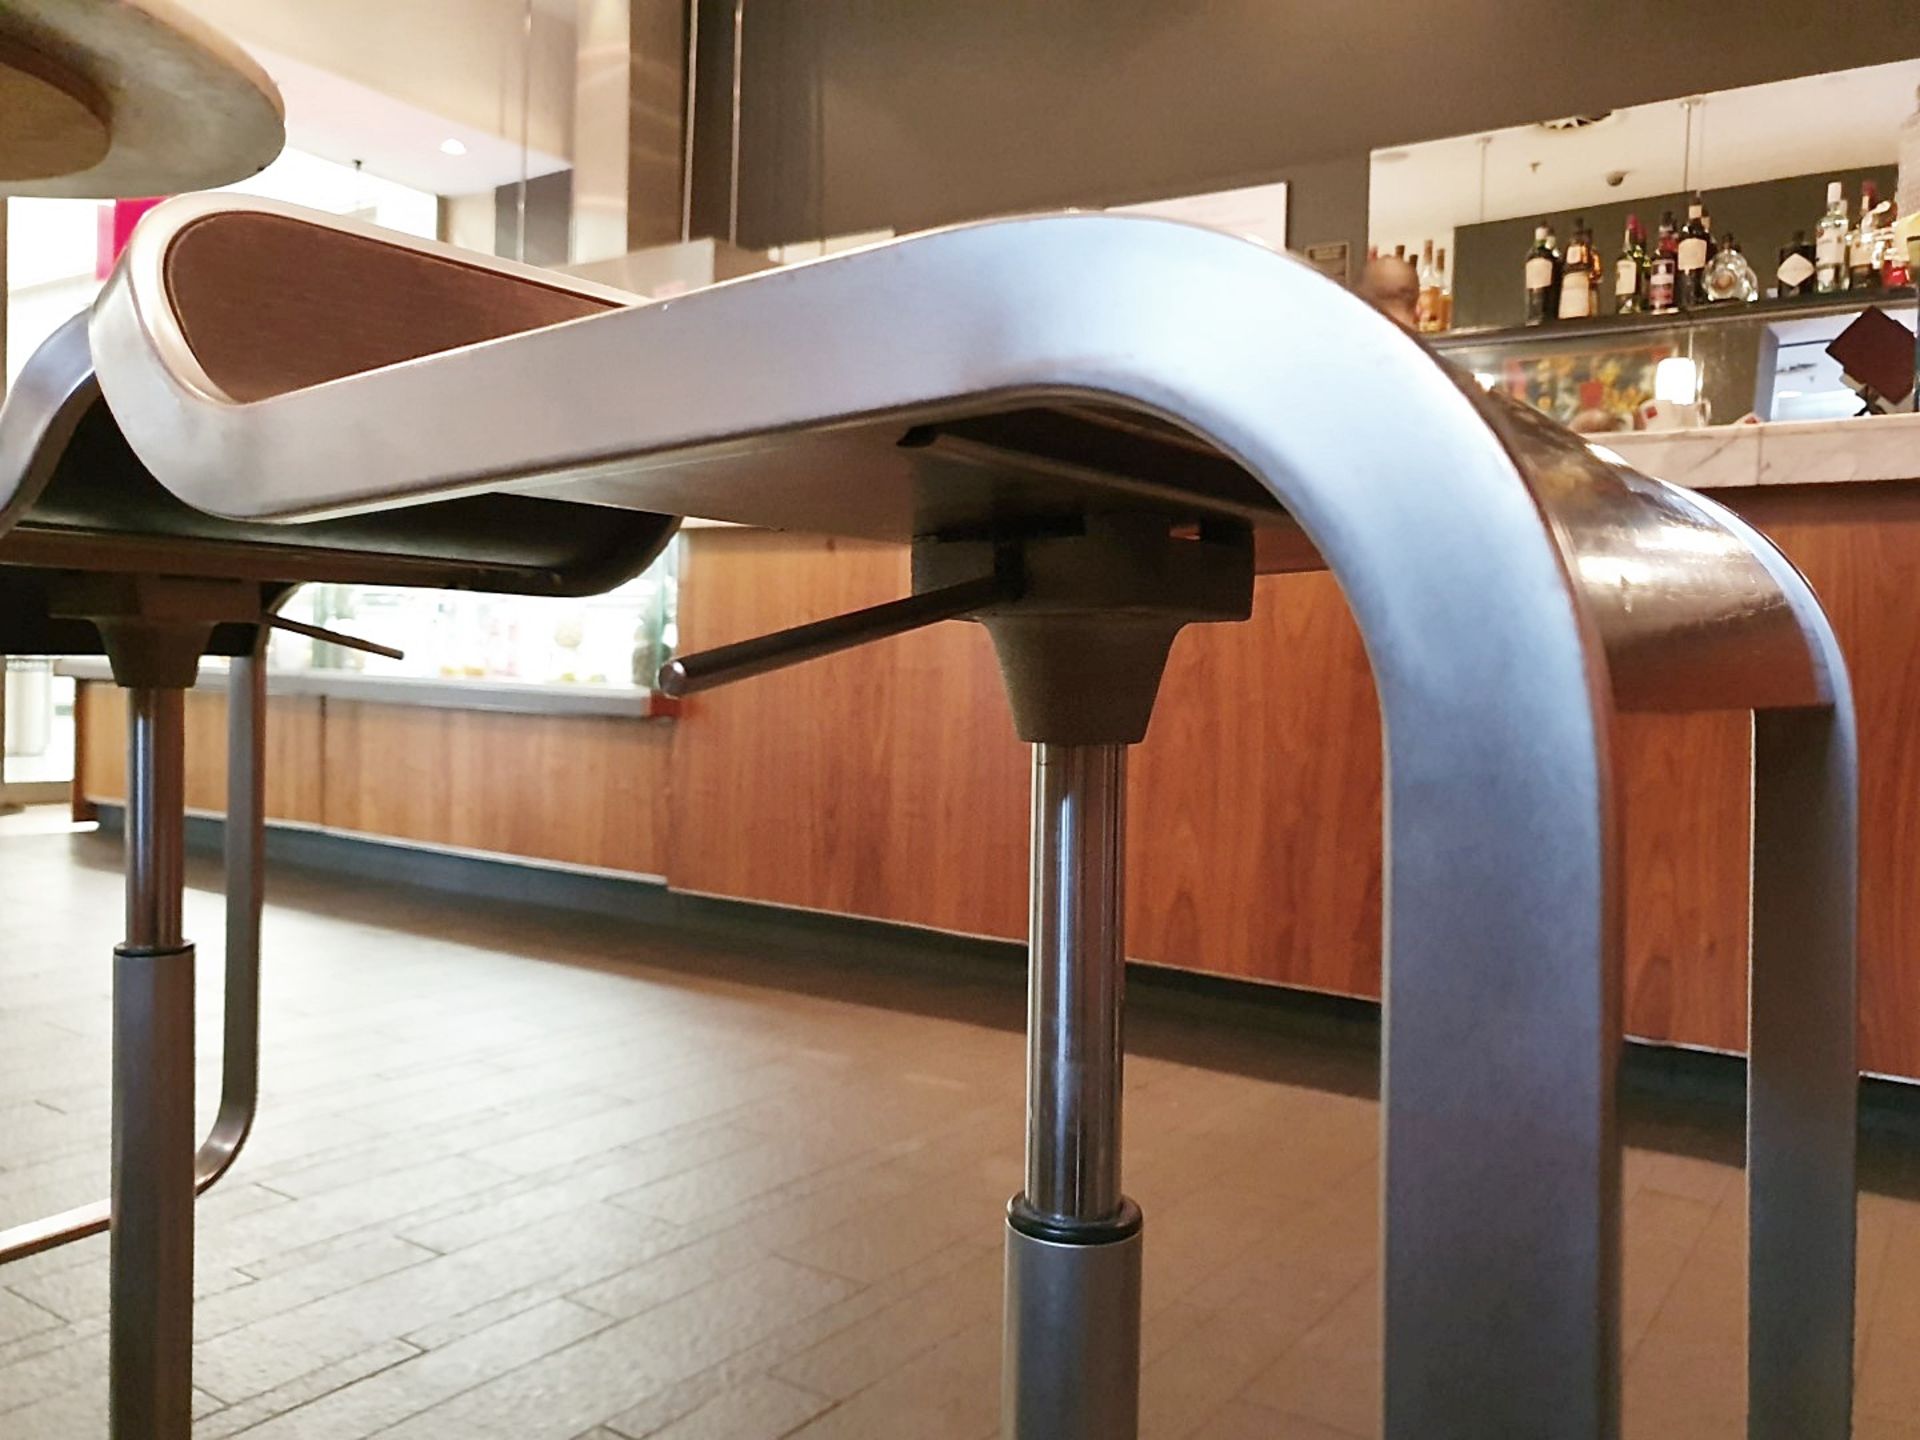 5 x Heavy Duty Commercial Bar Stools With Adjustable Hydraulic Aided Height - Dimensions: 35cm x - Image 7 of 8